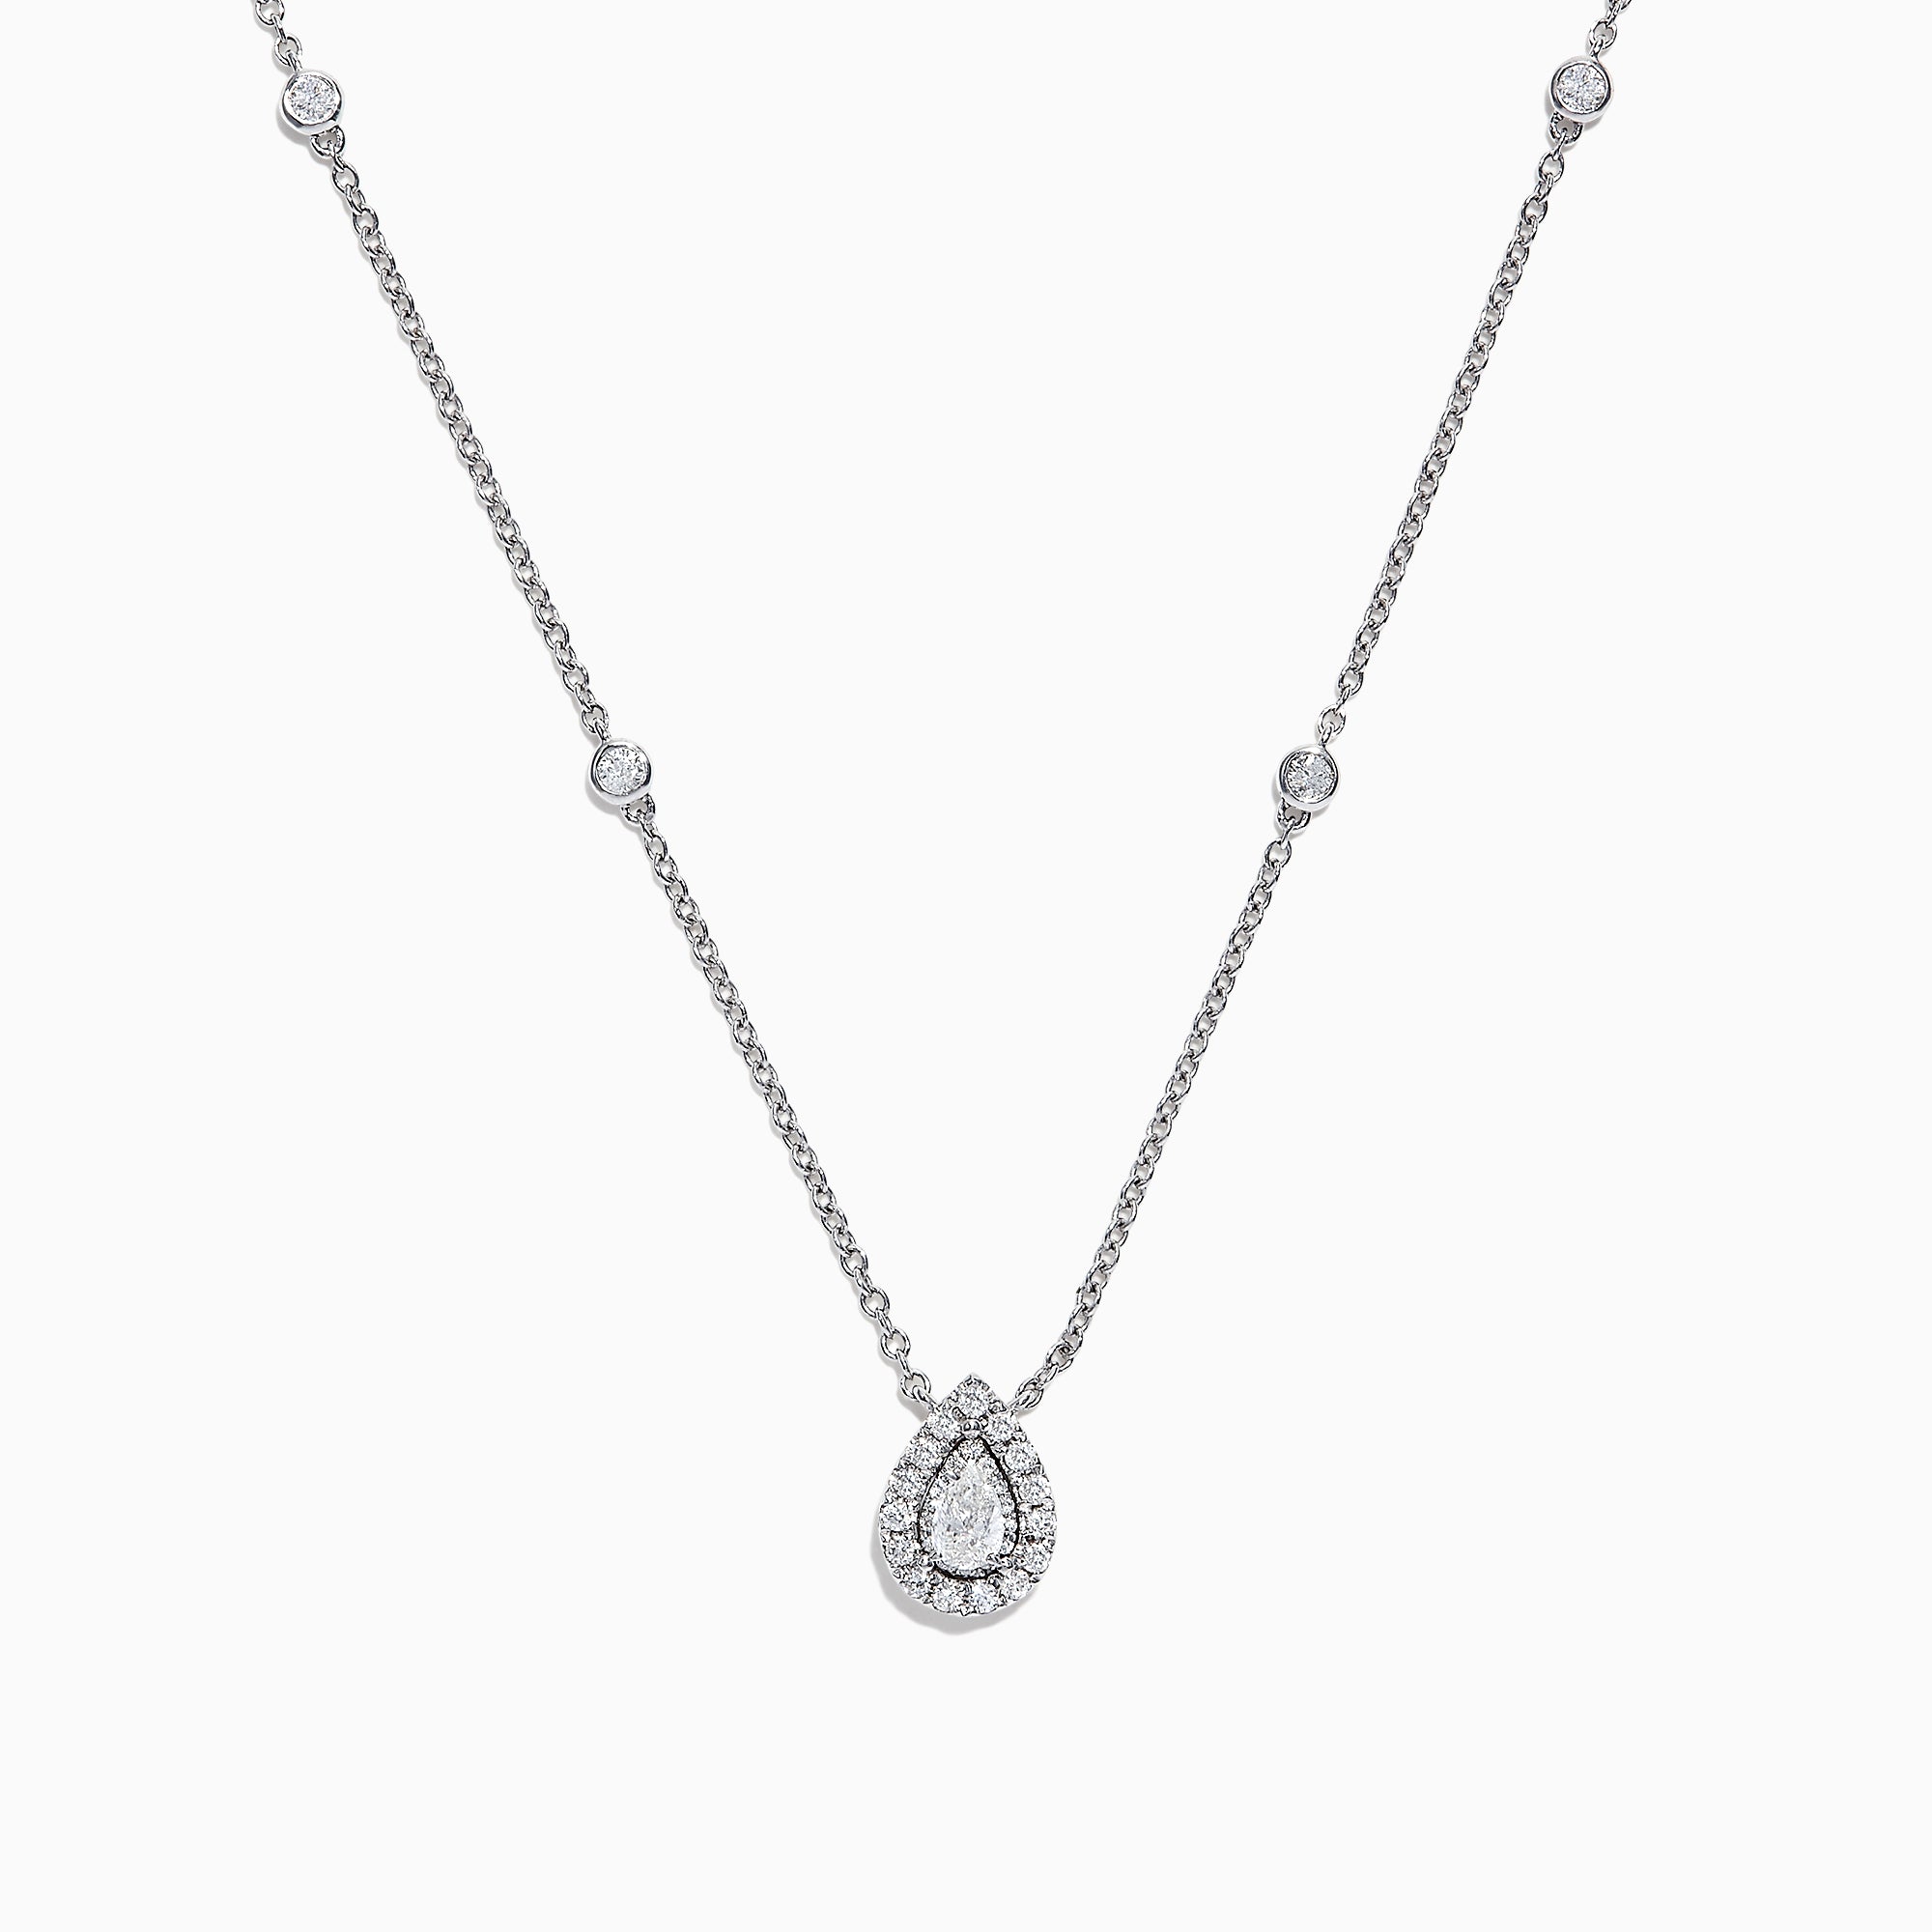 Pave Classica 14K White Gold Diamond Pear Shaped Necklace, 0.38 TCW ...